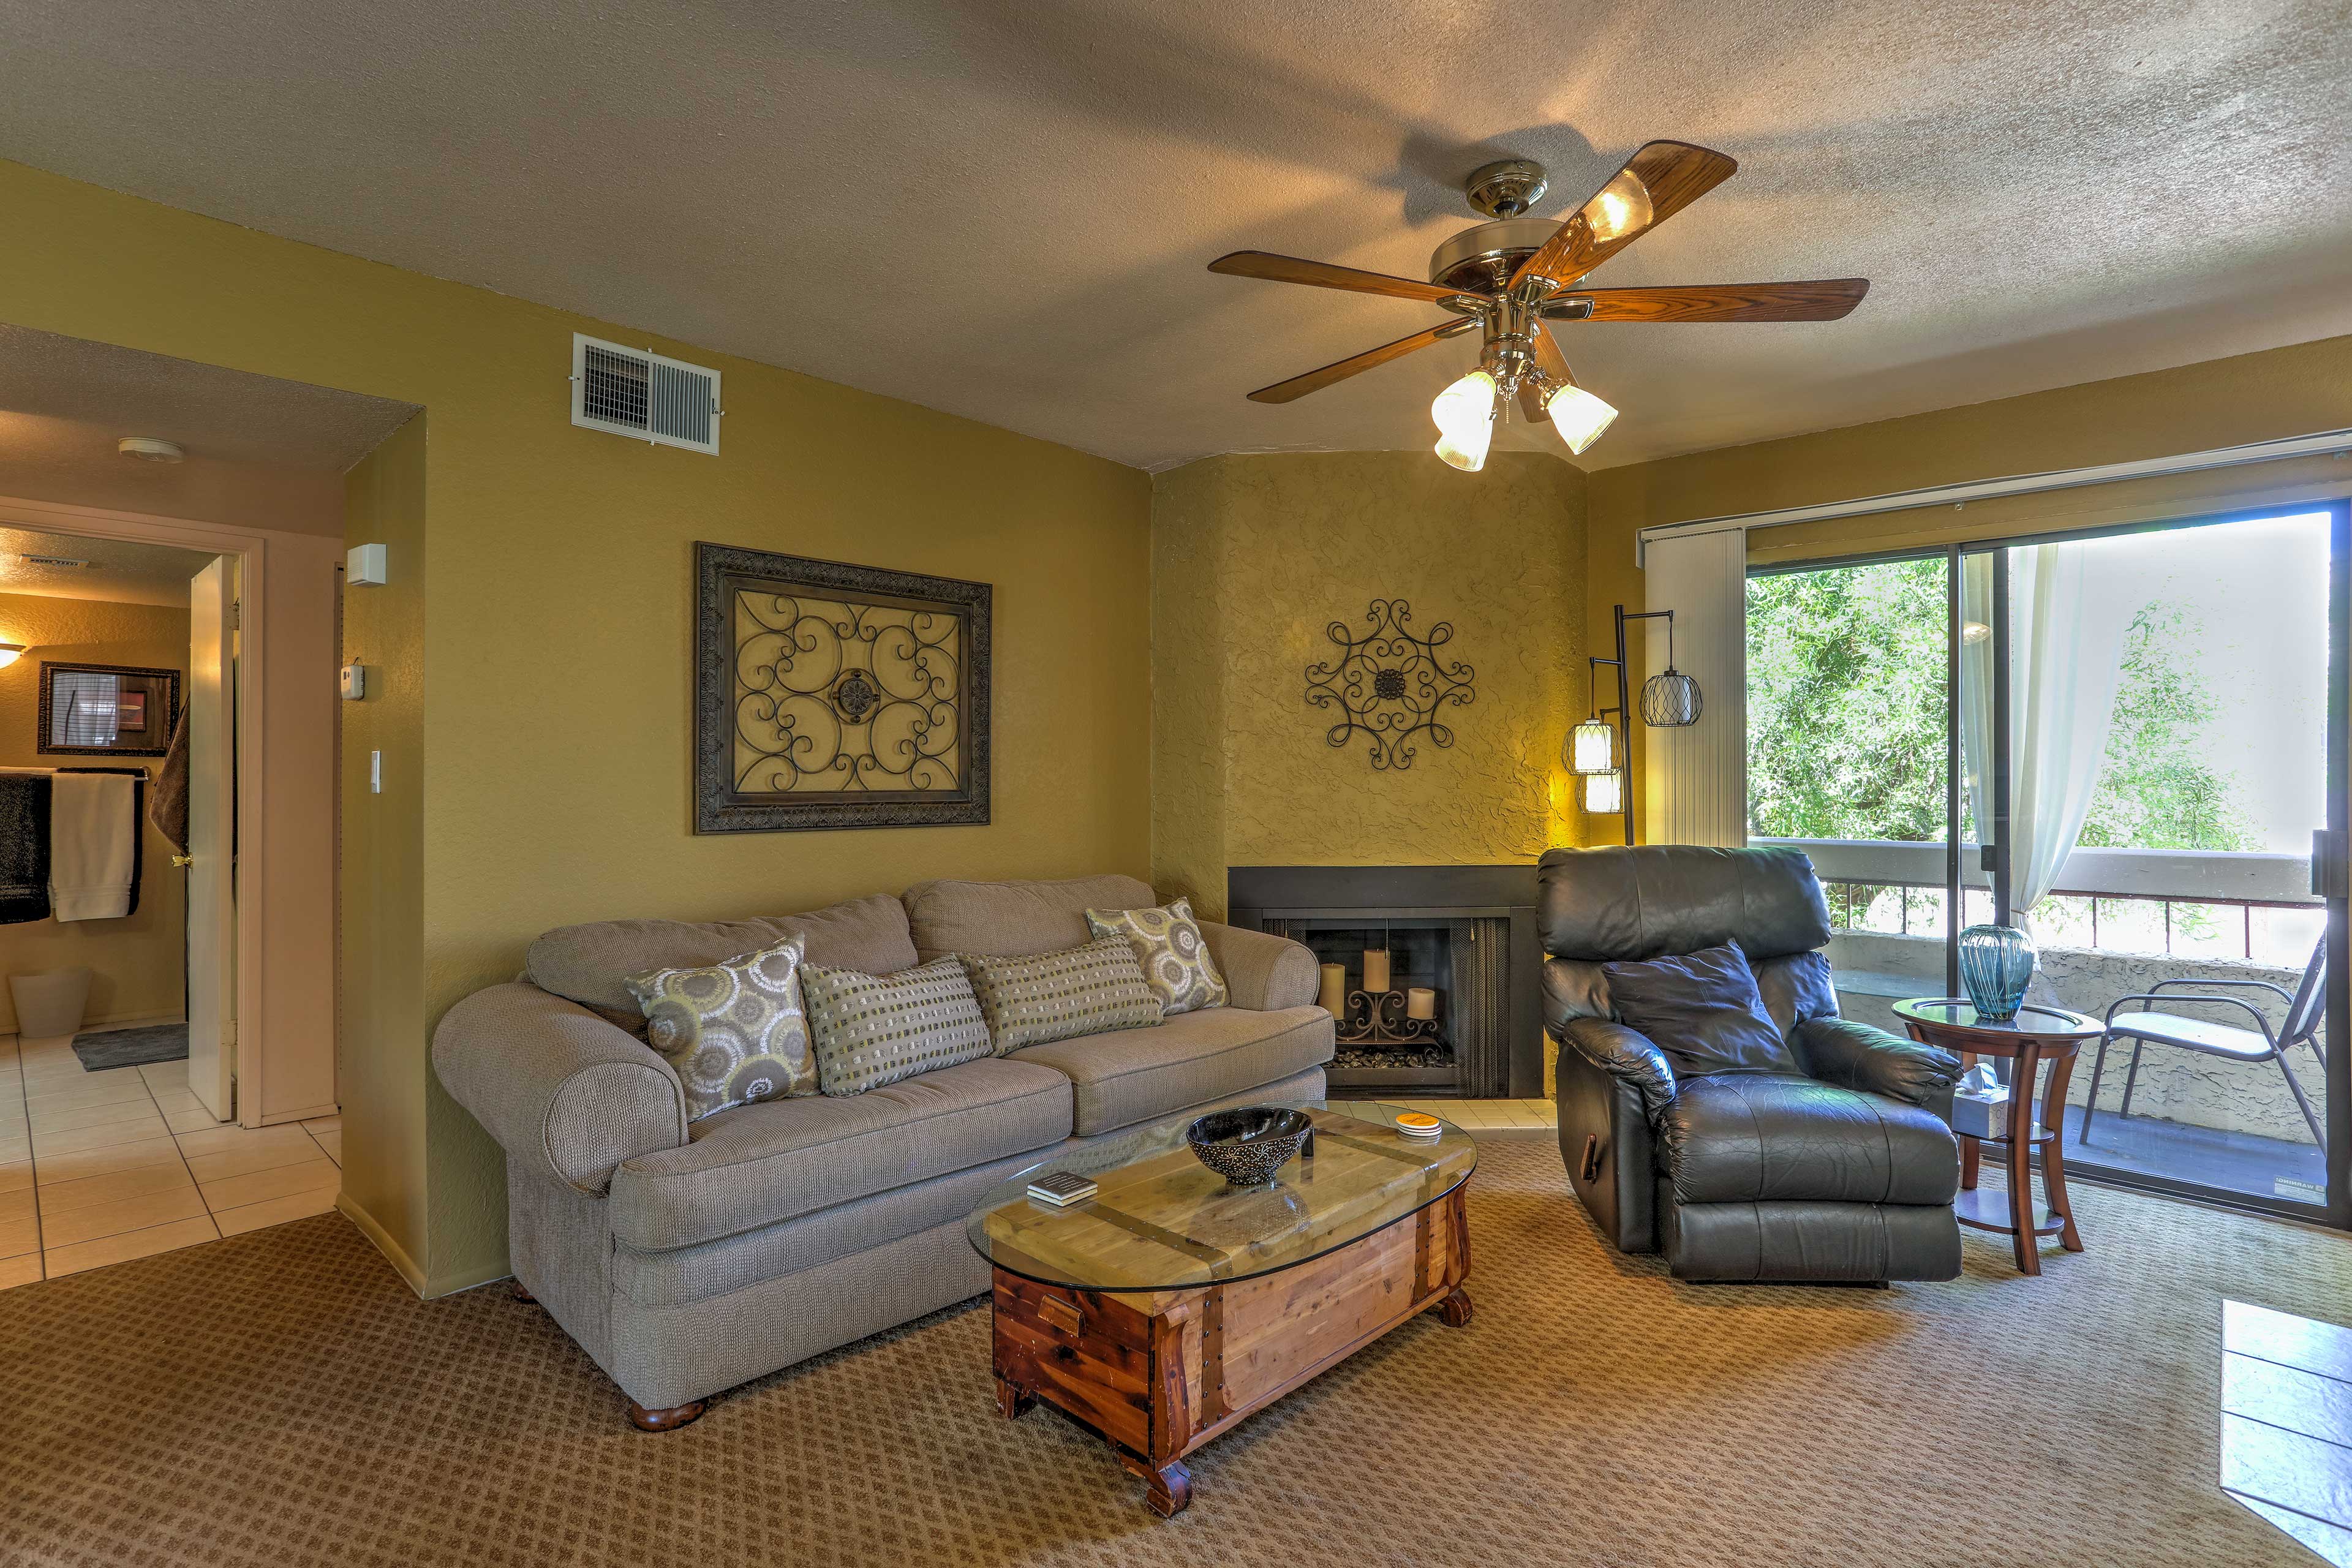 Living Room | Central Air Conditioning